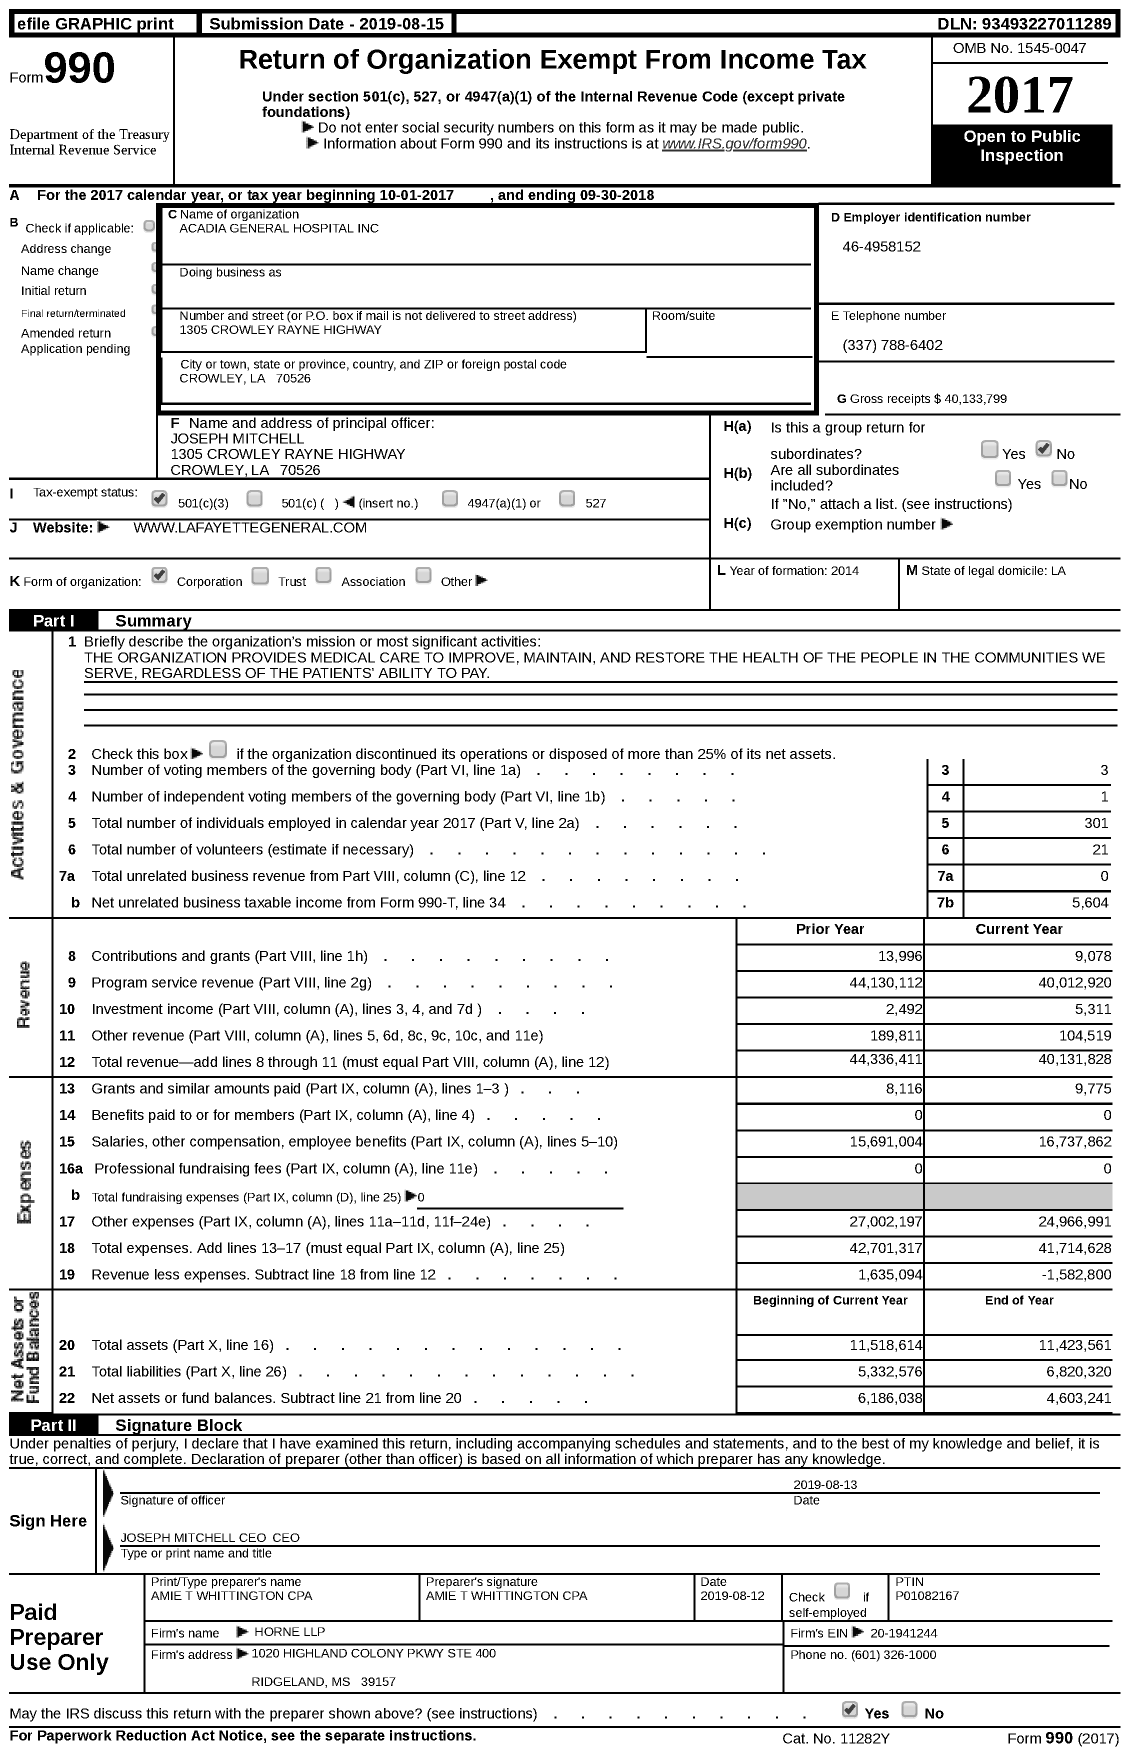 Image of first page of 2017 Form 990 for Ochsner Acadia General